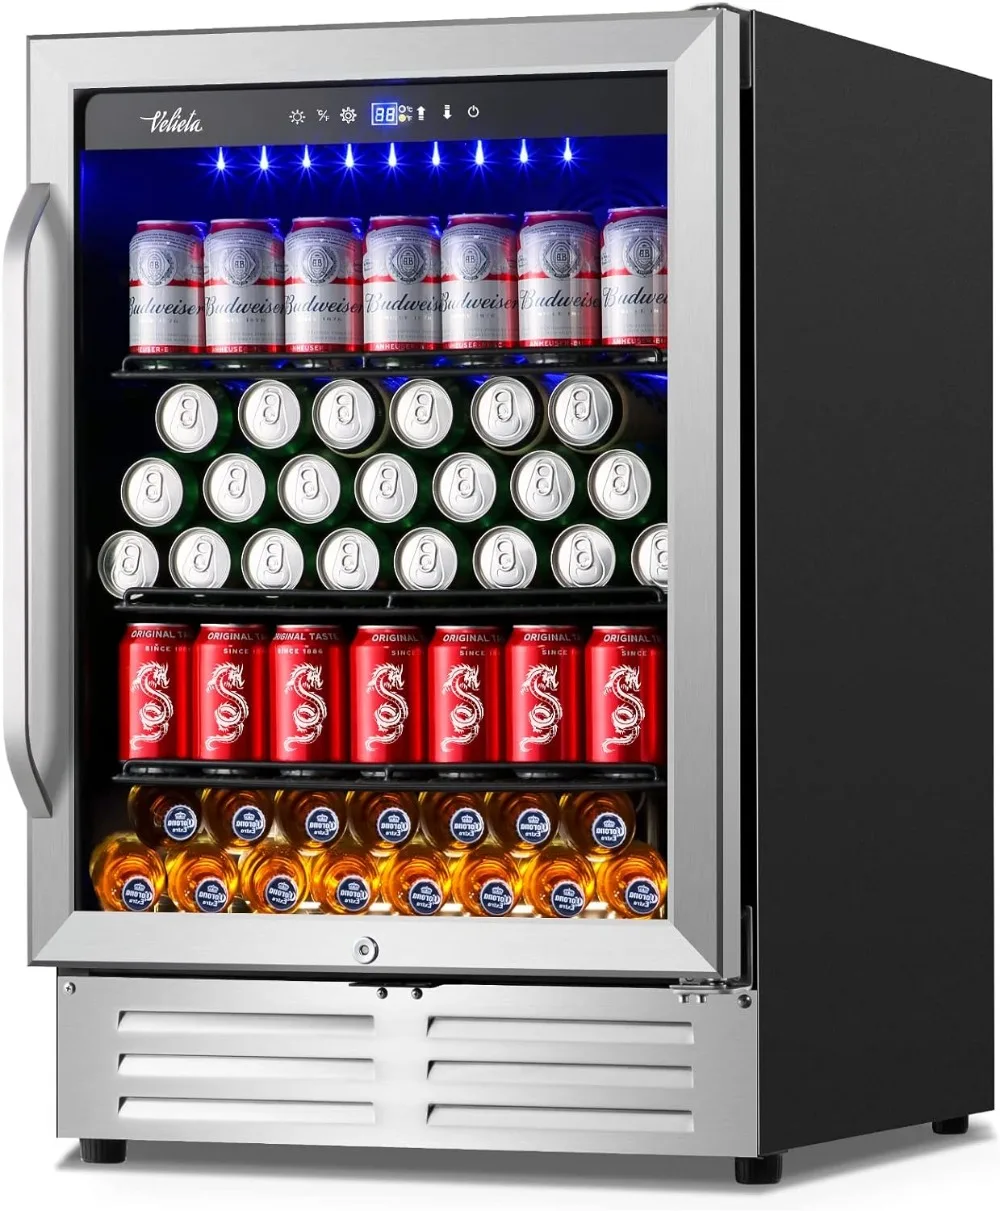 

24 Inch Beverage Refrigerator Cooler,210 Cans Wide Beverage and Beer Fridge with Glass Door and Powerful Cooling Compressor